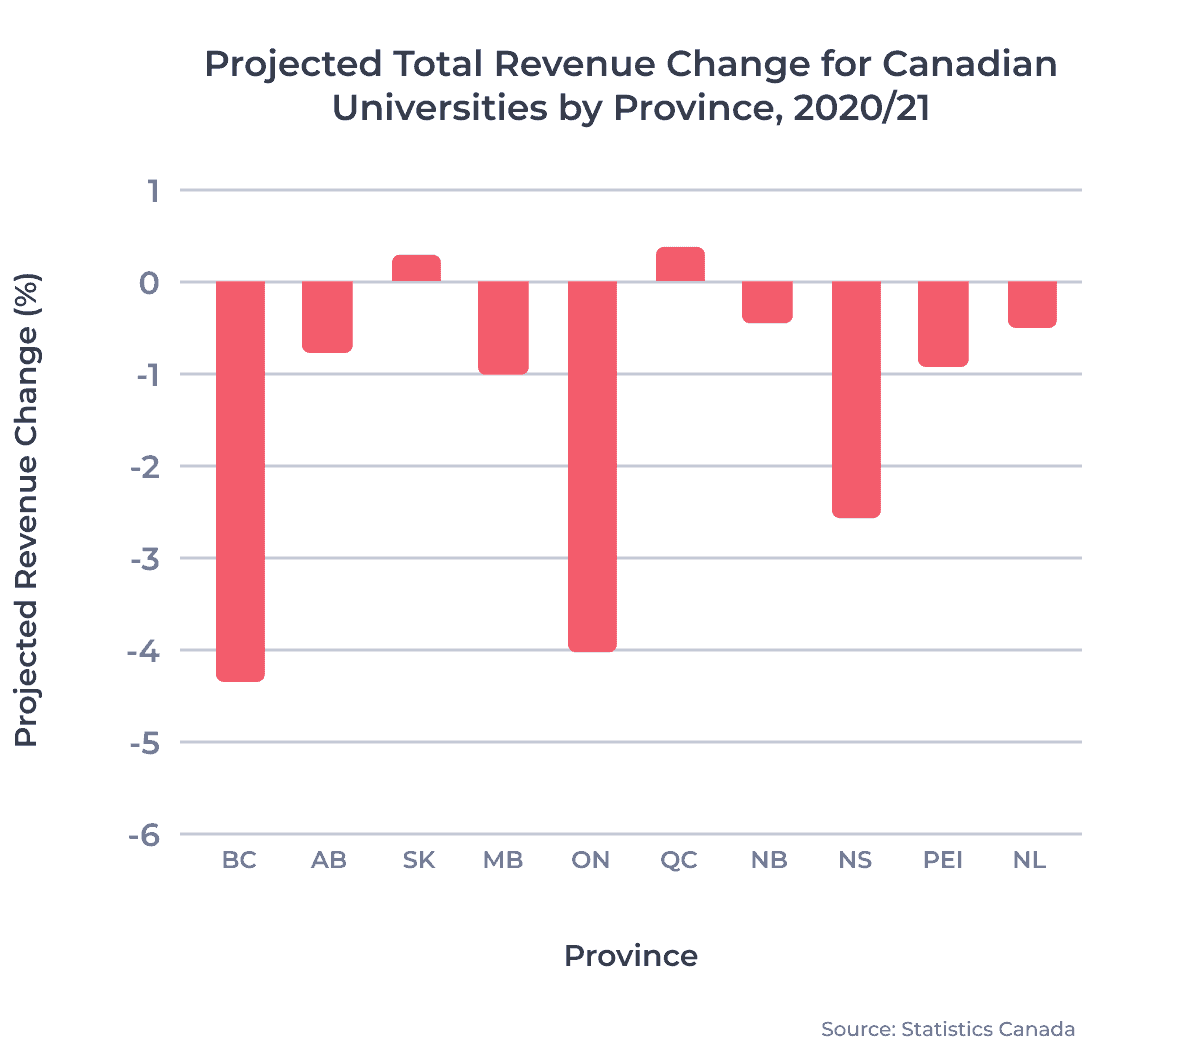 Projected Total Revenue Change for Canadian Universities by Province, 2020/21